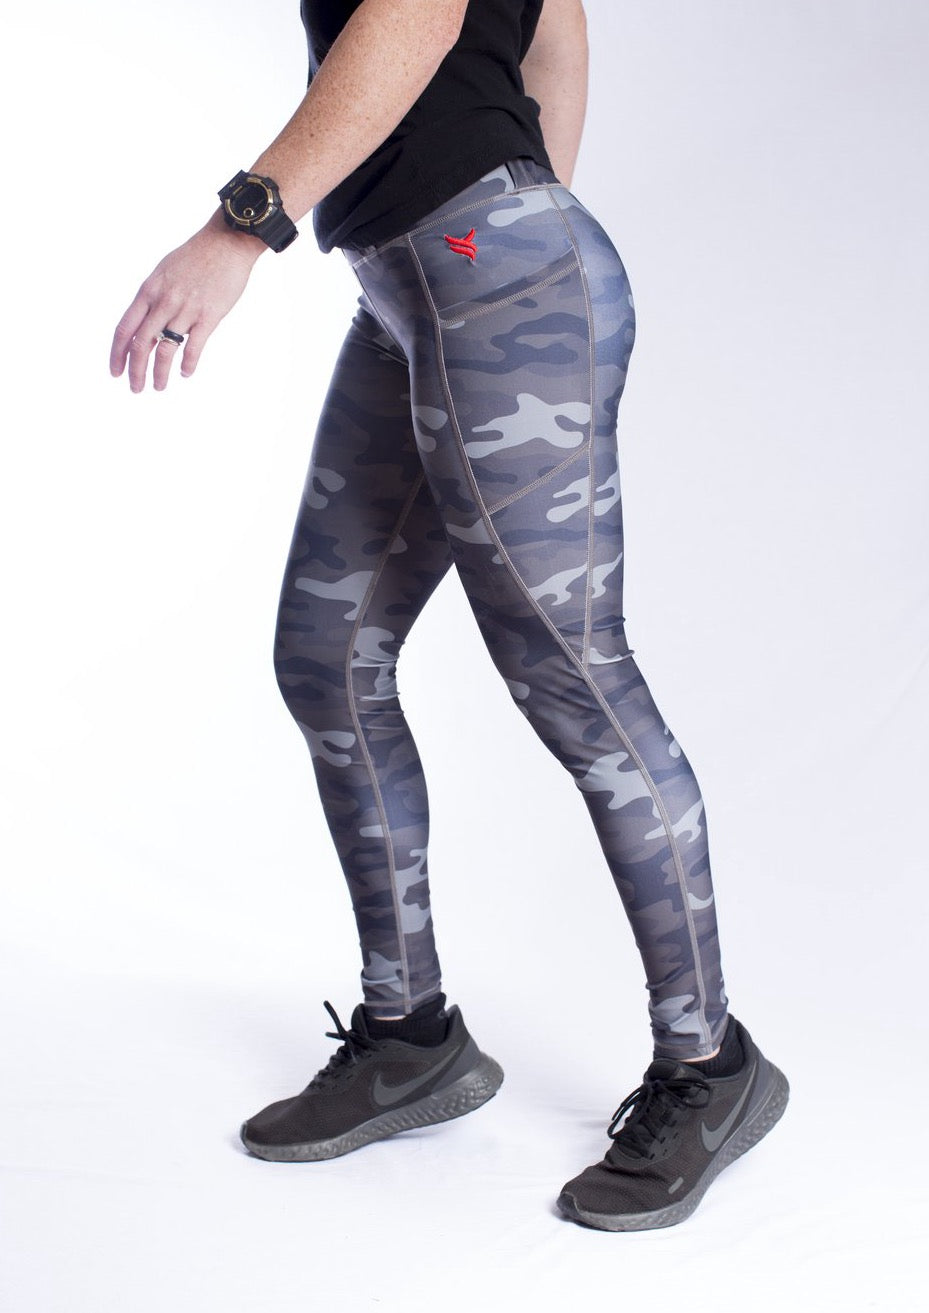 Concealed Carry Leggings, Twilight Camo